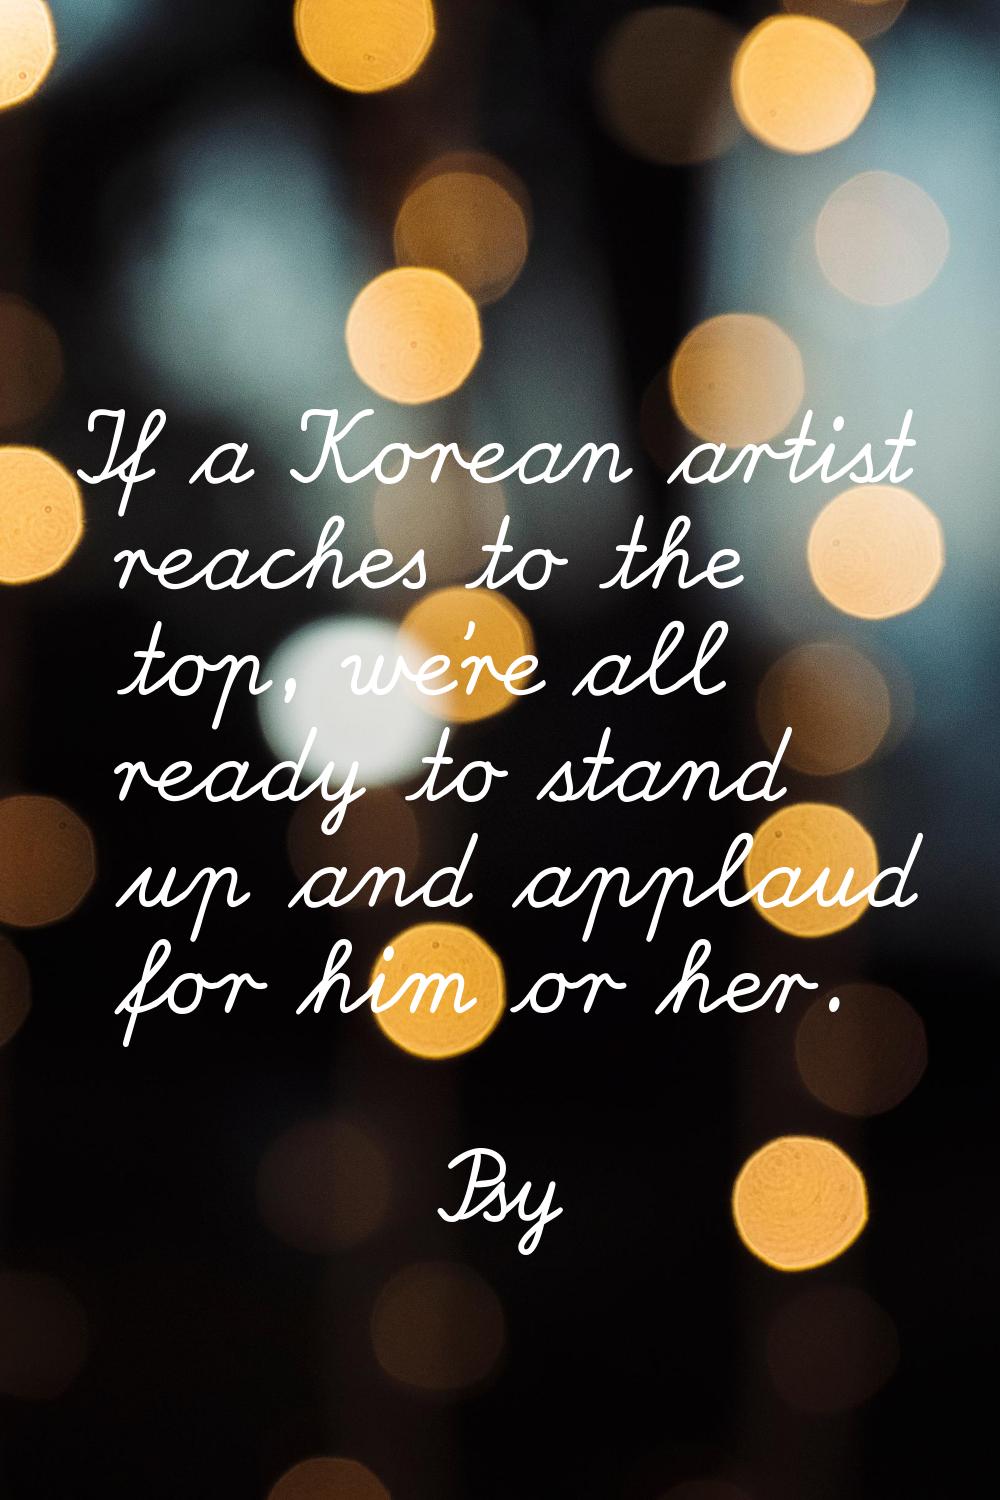 If a Korean artist reaches to the top, we're all ready to stand up and applaud for him or her.